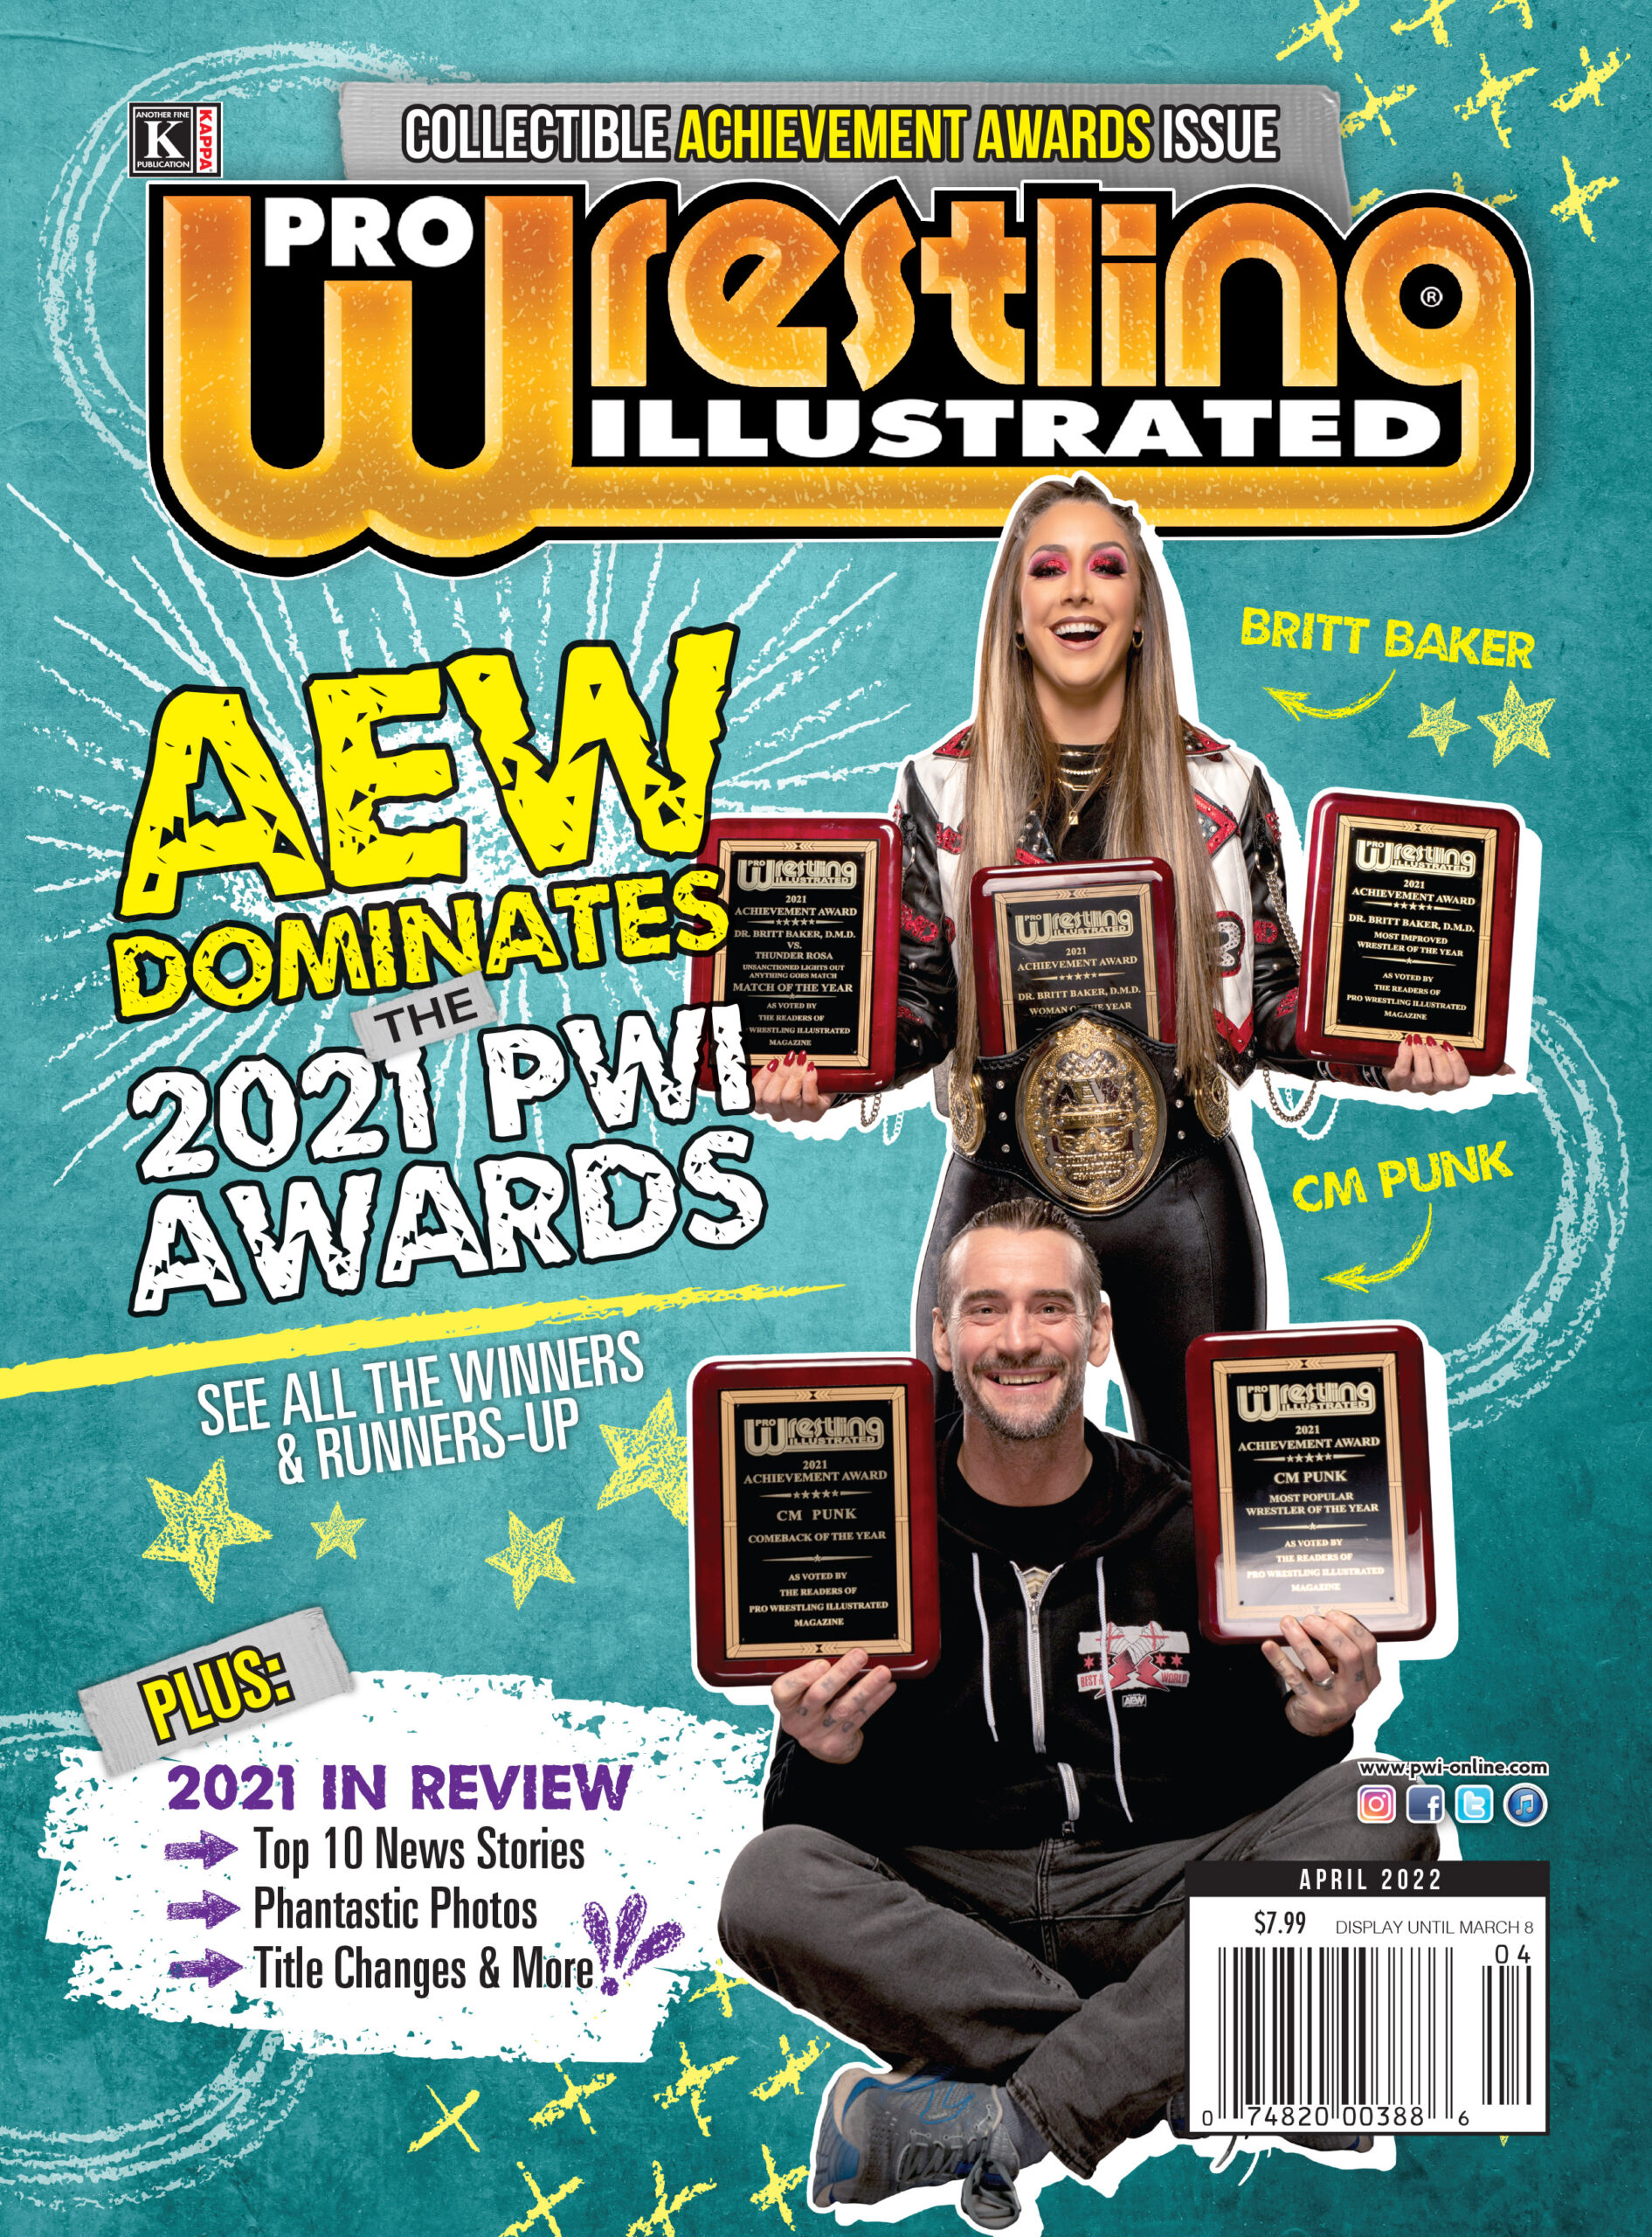 Achievement 2021 (April 2022 Awards Issue) PWI Pro Wrestling Illustrated